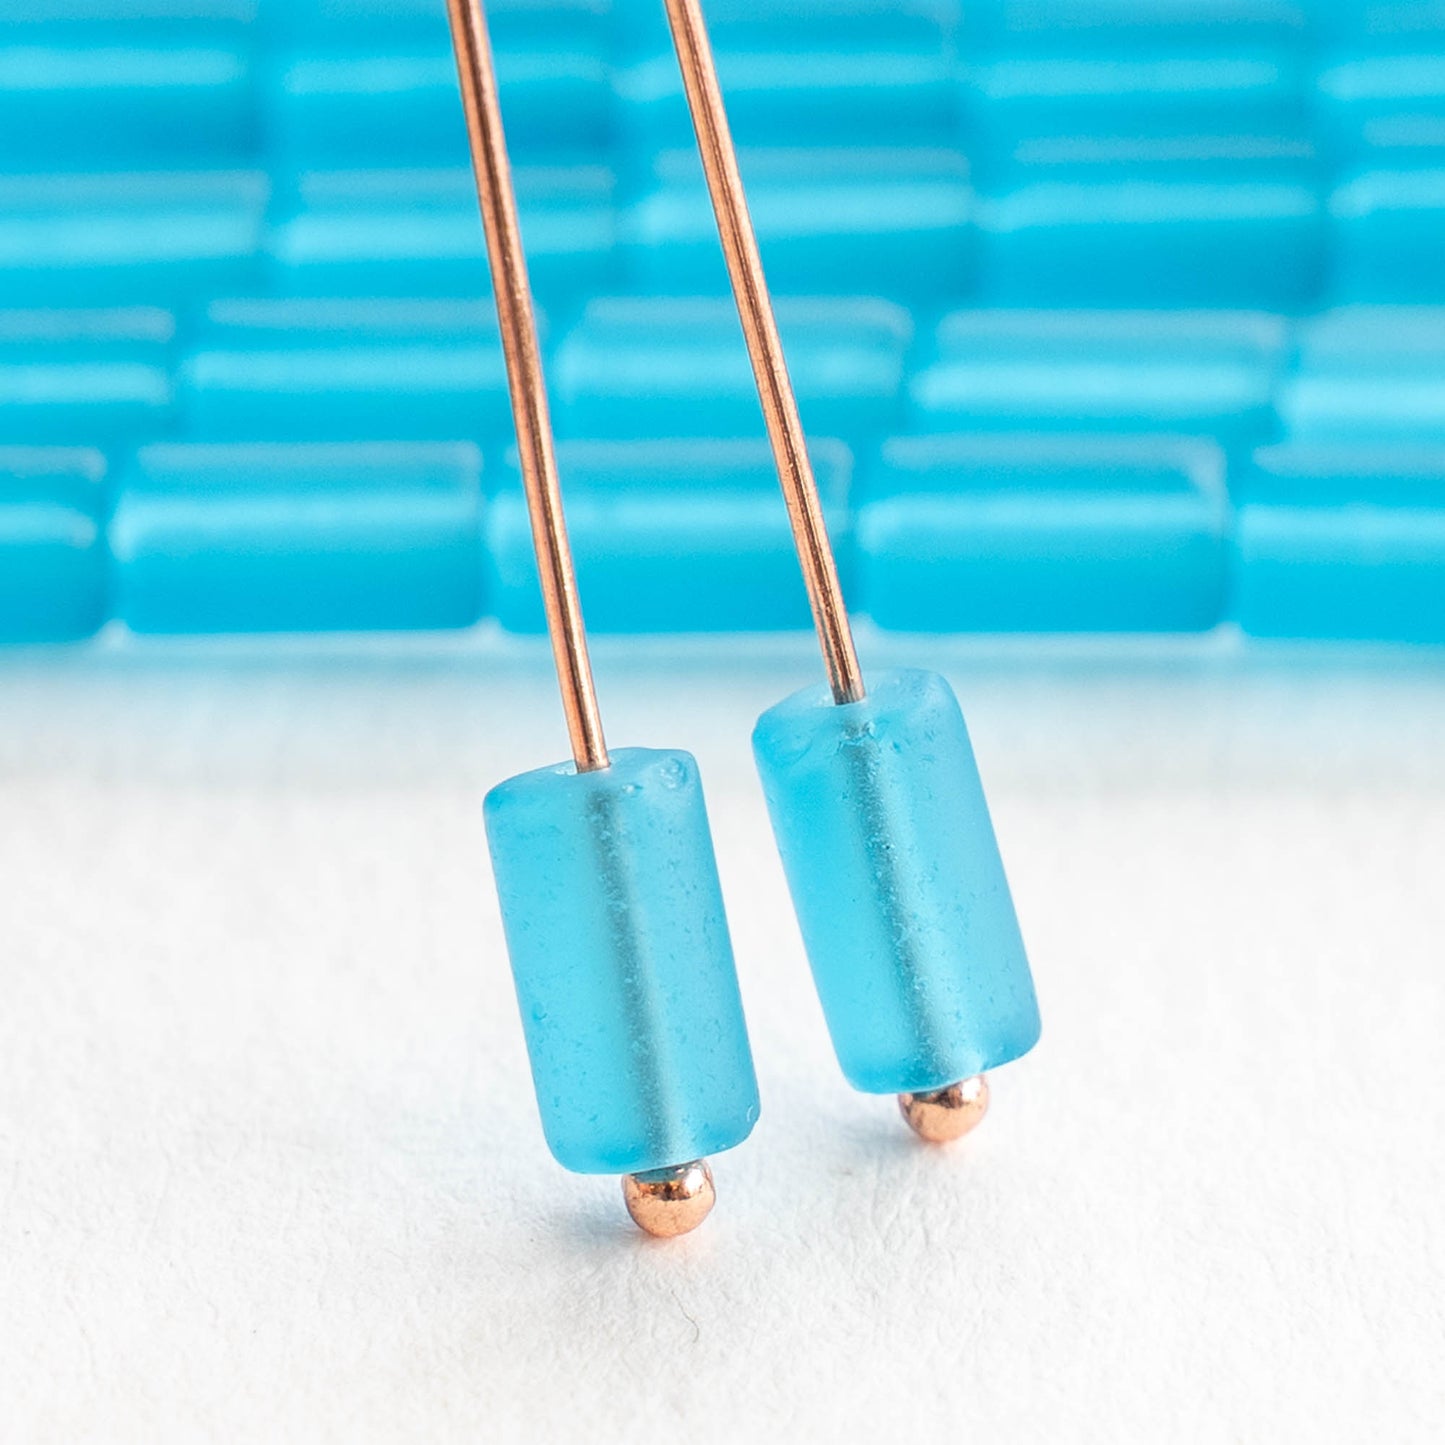 9x4mm Frosted Glass Tube Beads - Aqua - 48 Beads